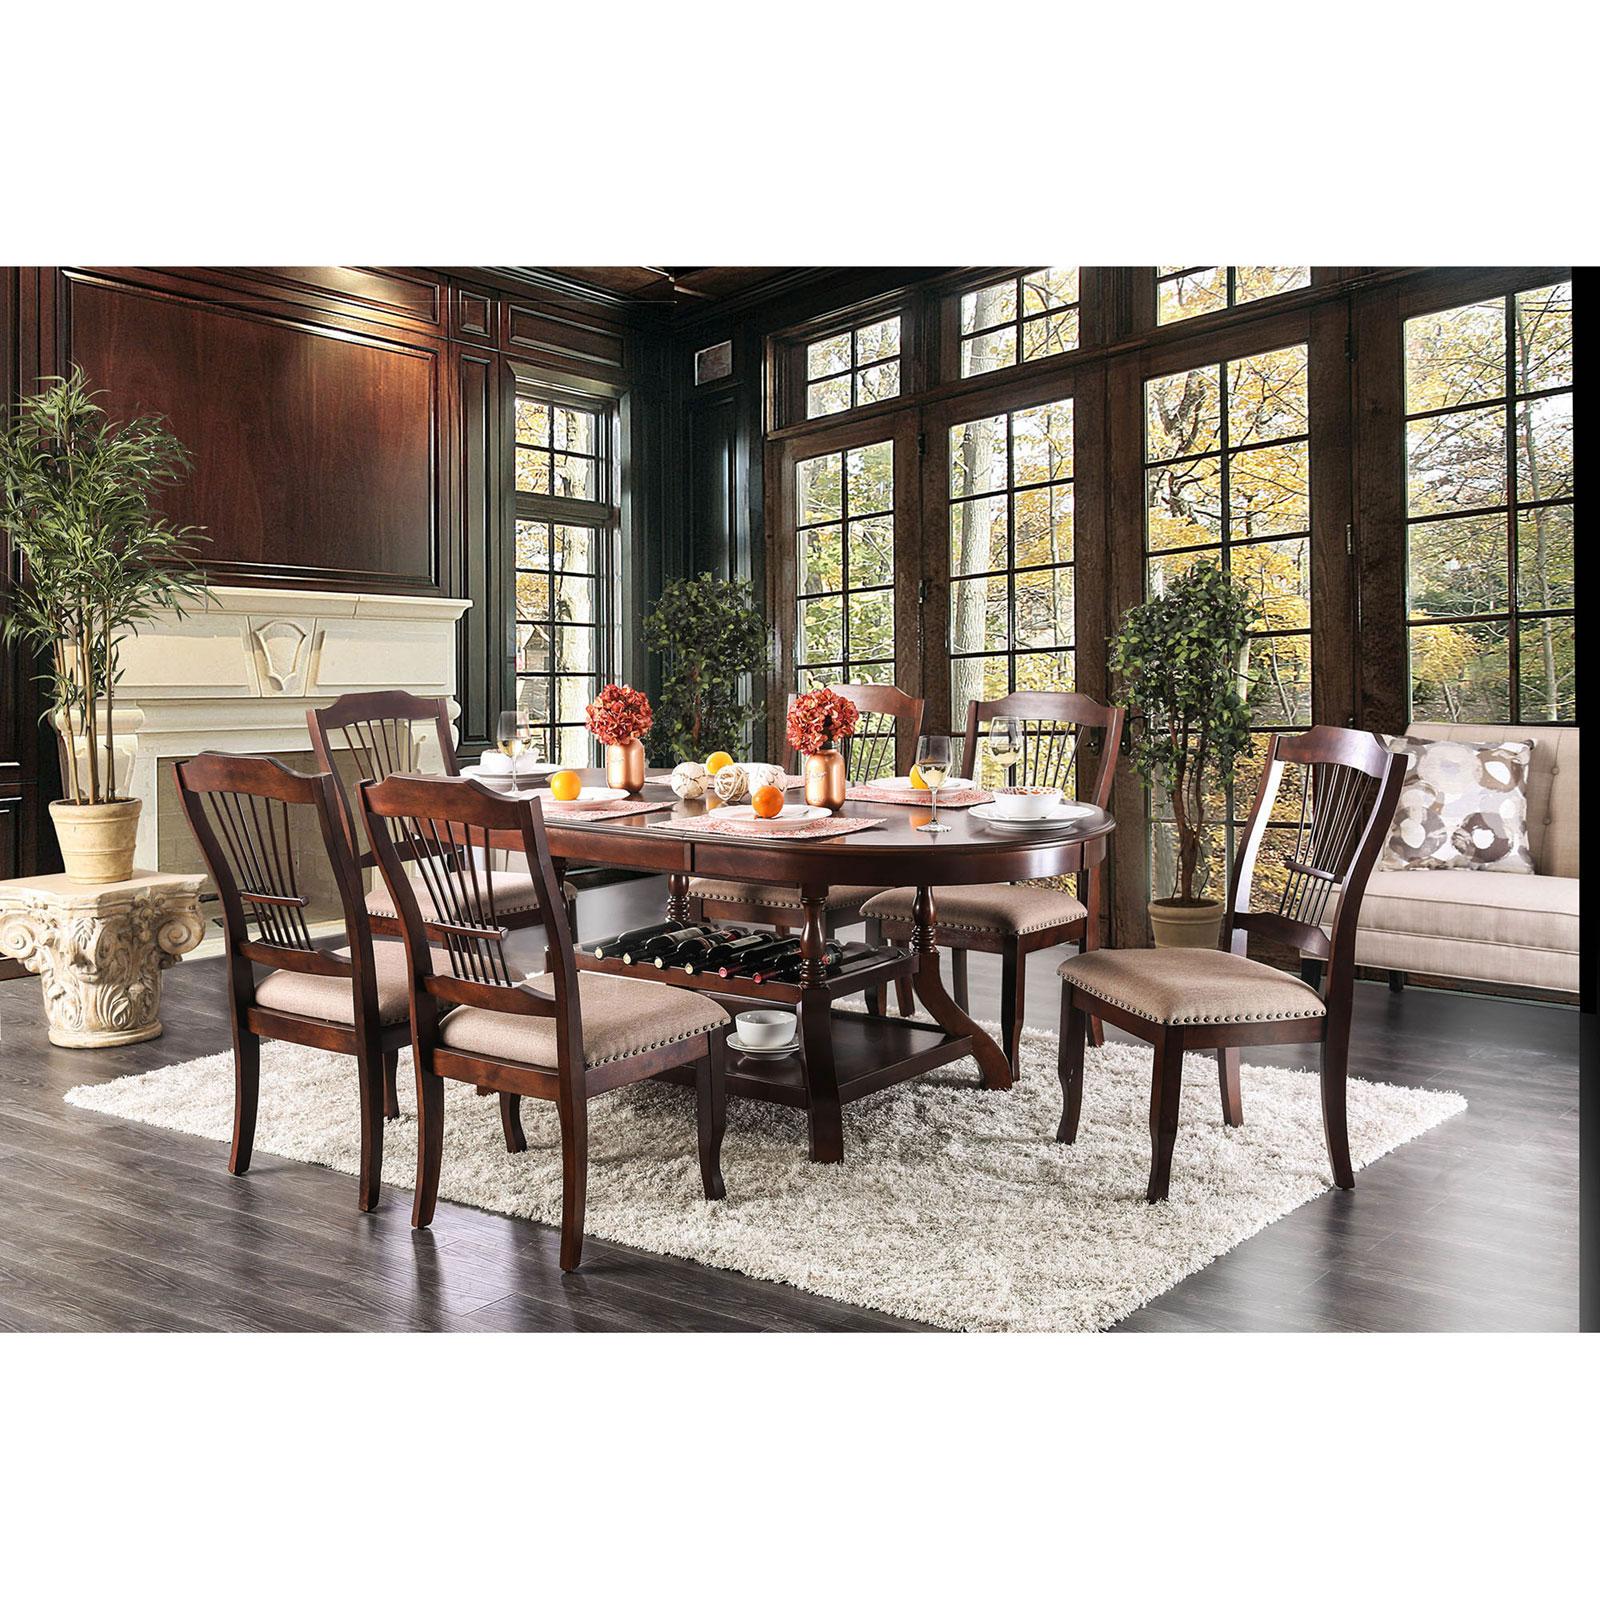 Transitional Dining Table Set Jordyn CM3626T-7PC in Brown, Beige Fabric